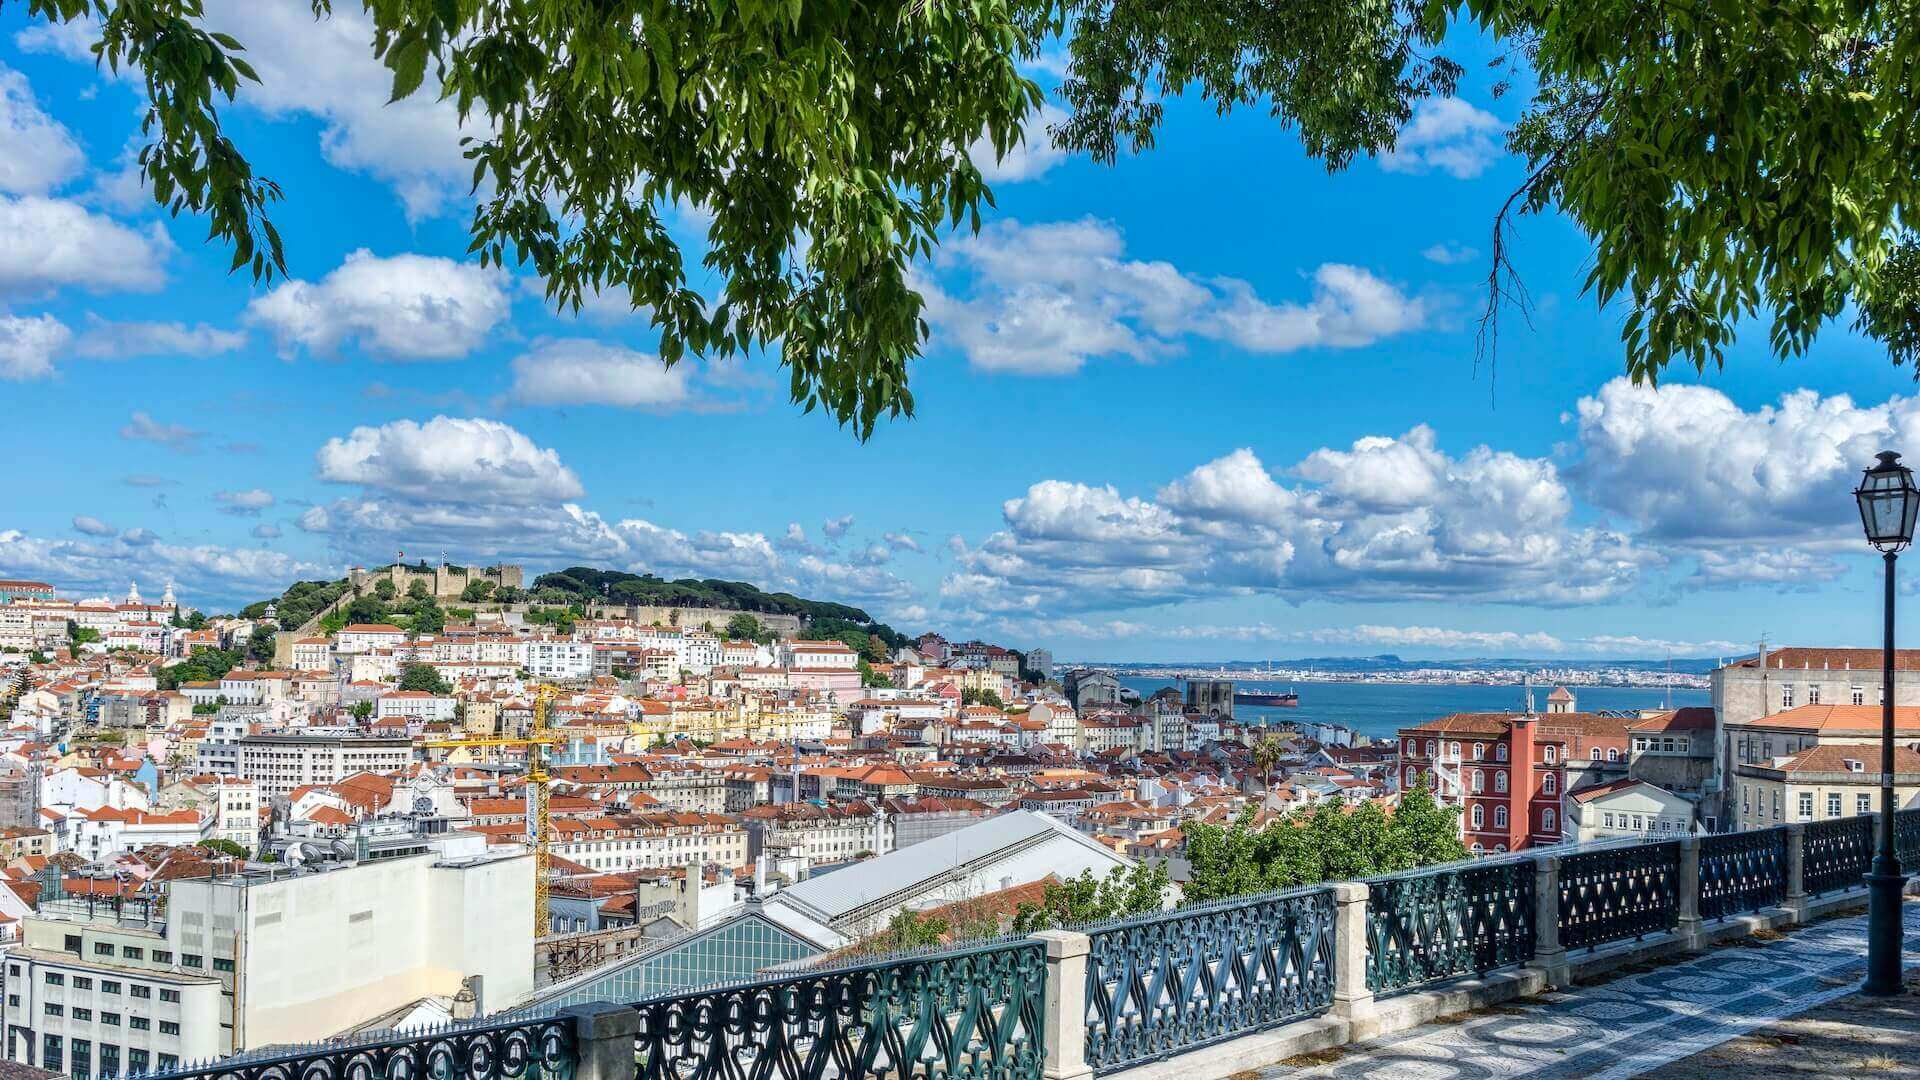 Discover the Hidden Gems of Lisbon: Top 3 Unusual Things to Do in Portugal’s Capital (Part 3)